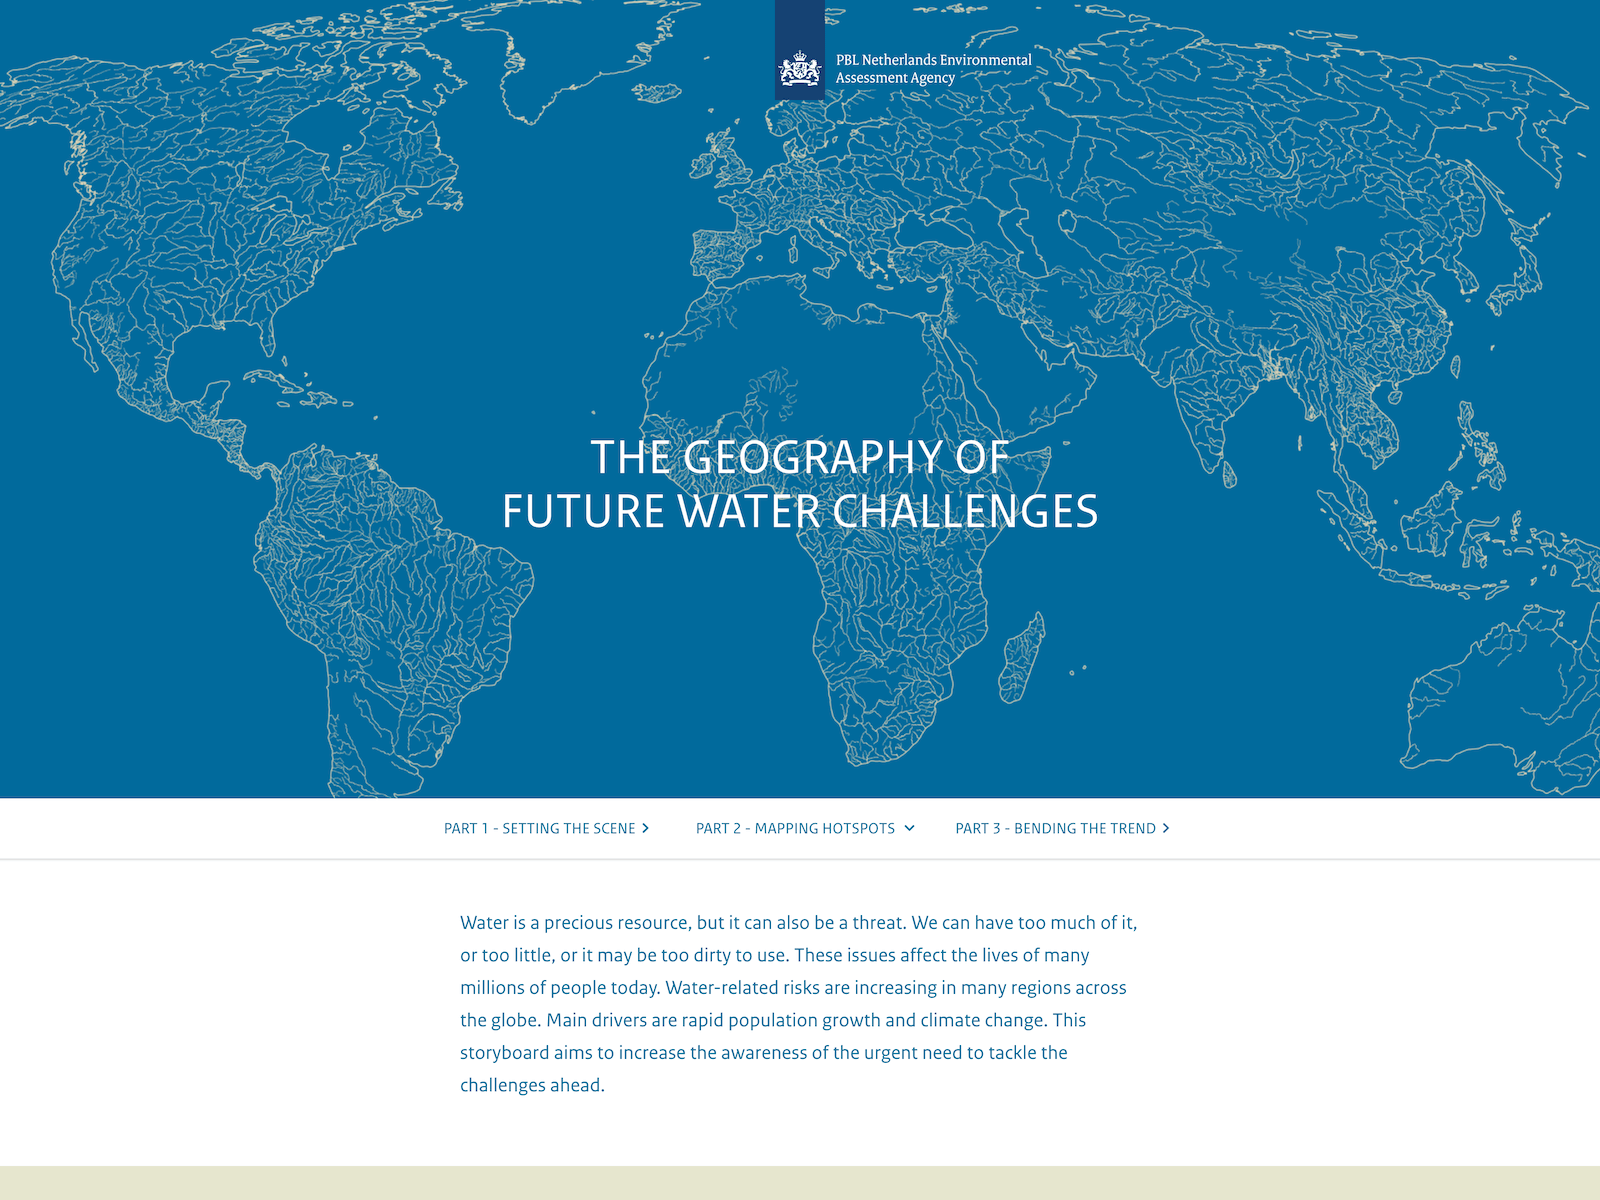 The Geography of Future Water Challenges